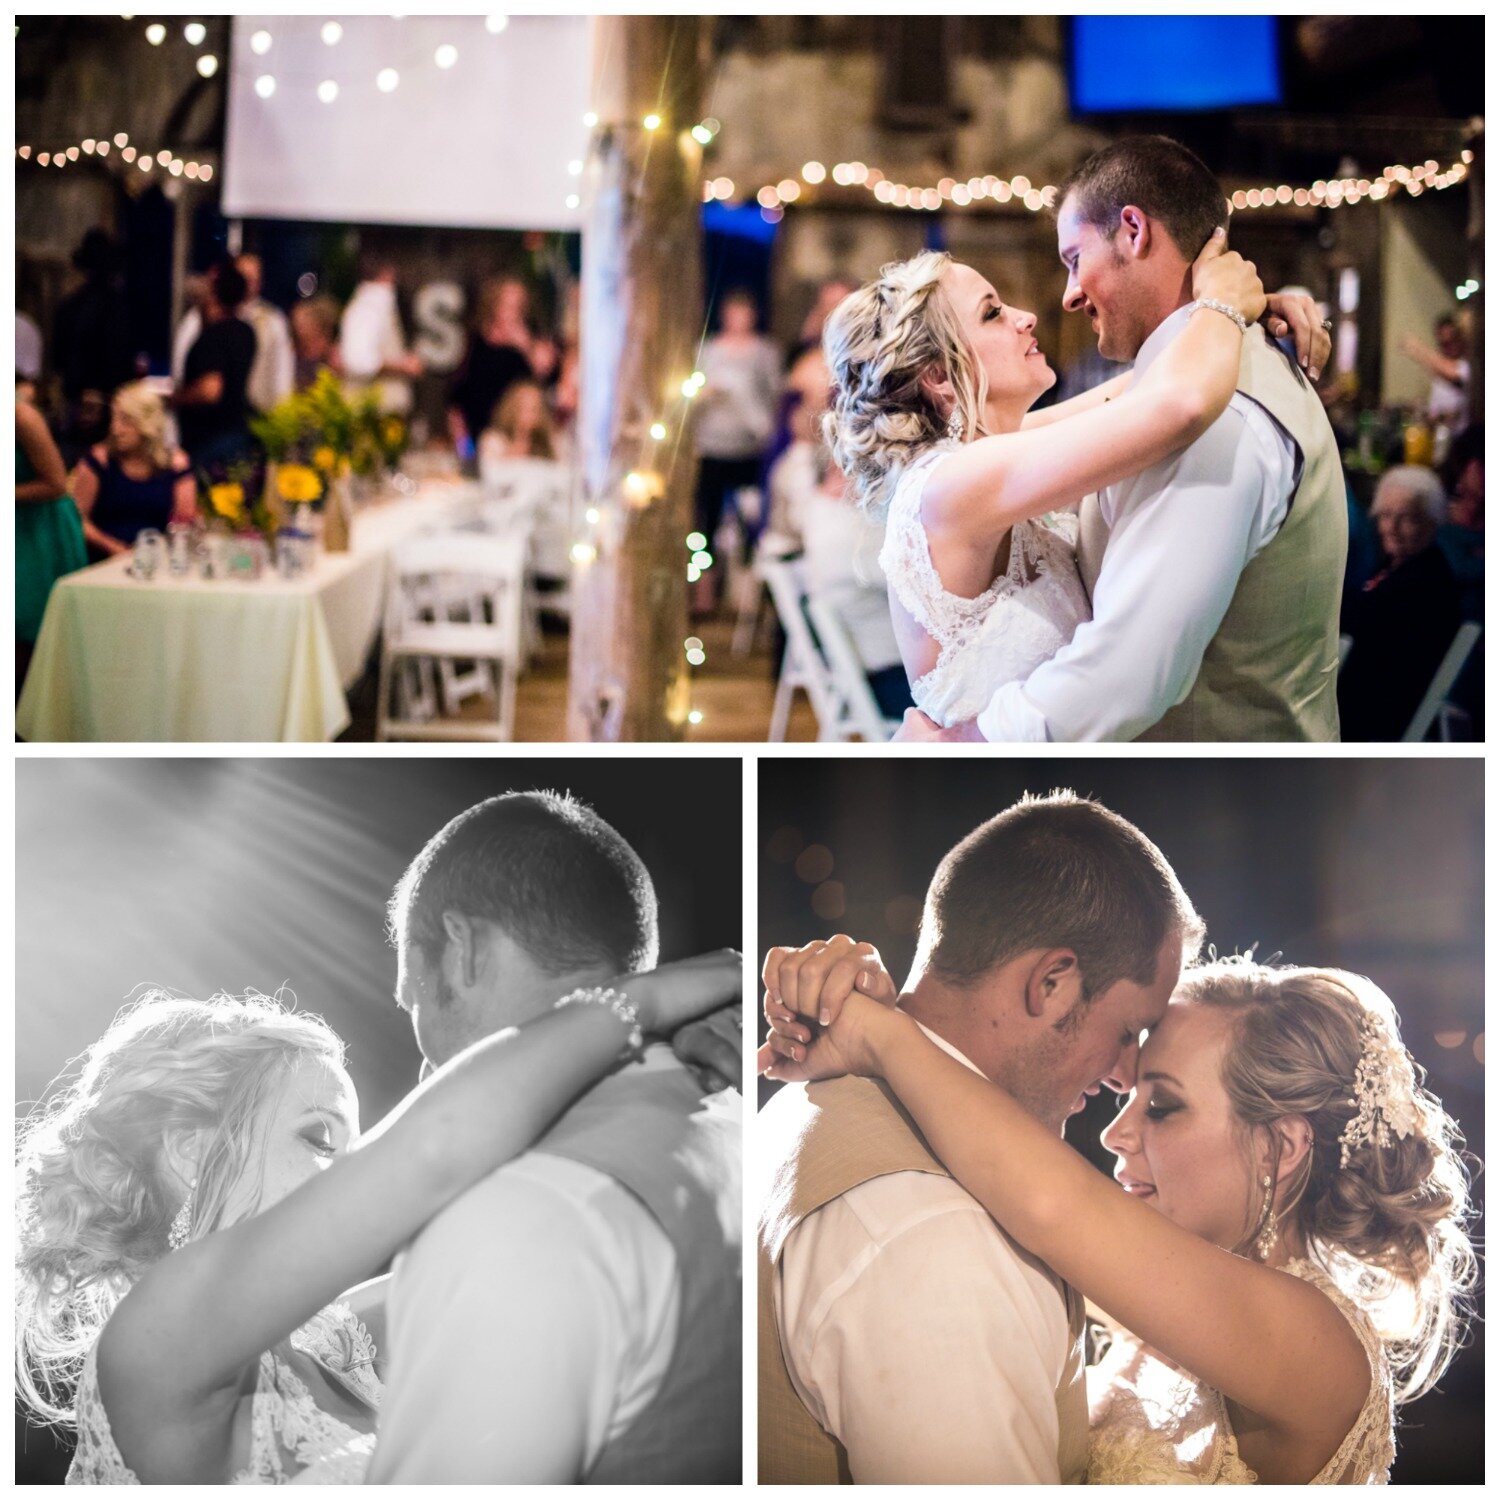  The bride and groom's first dance.&nbsp;Wedding at The barn at Evergreen Memorial. Photographed by JMGant Photography. 